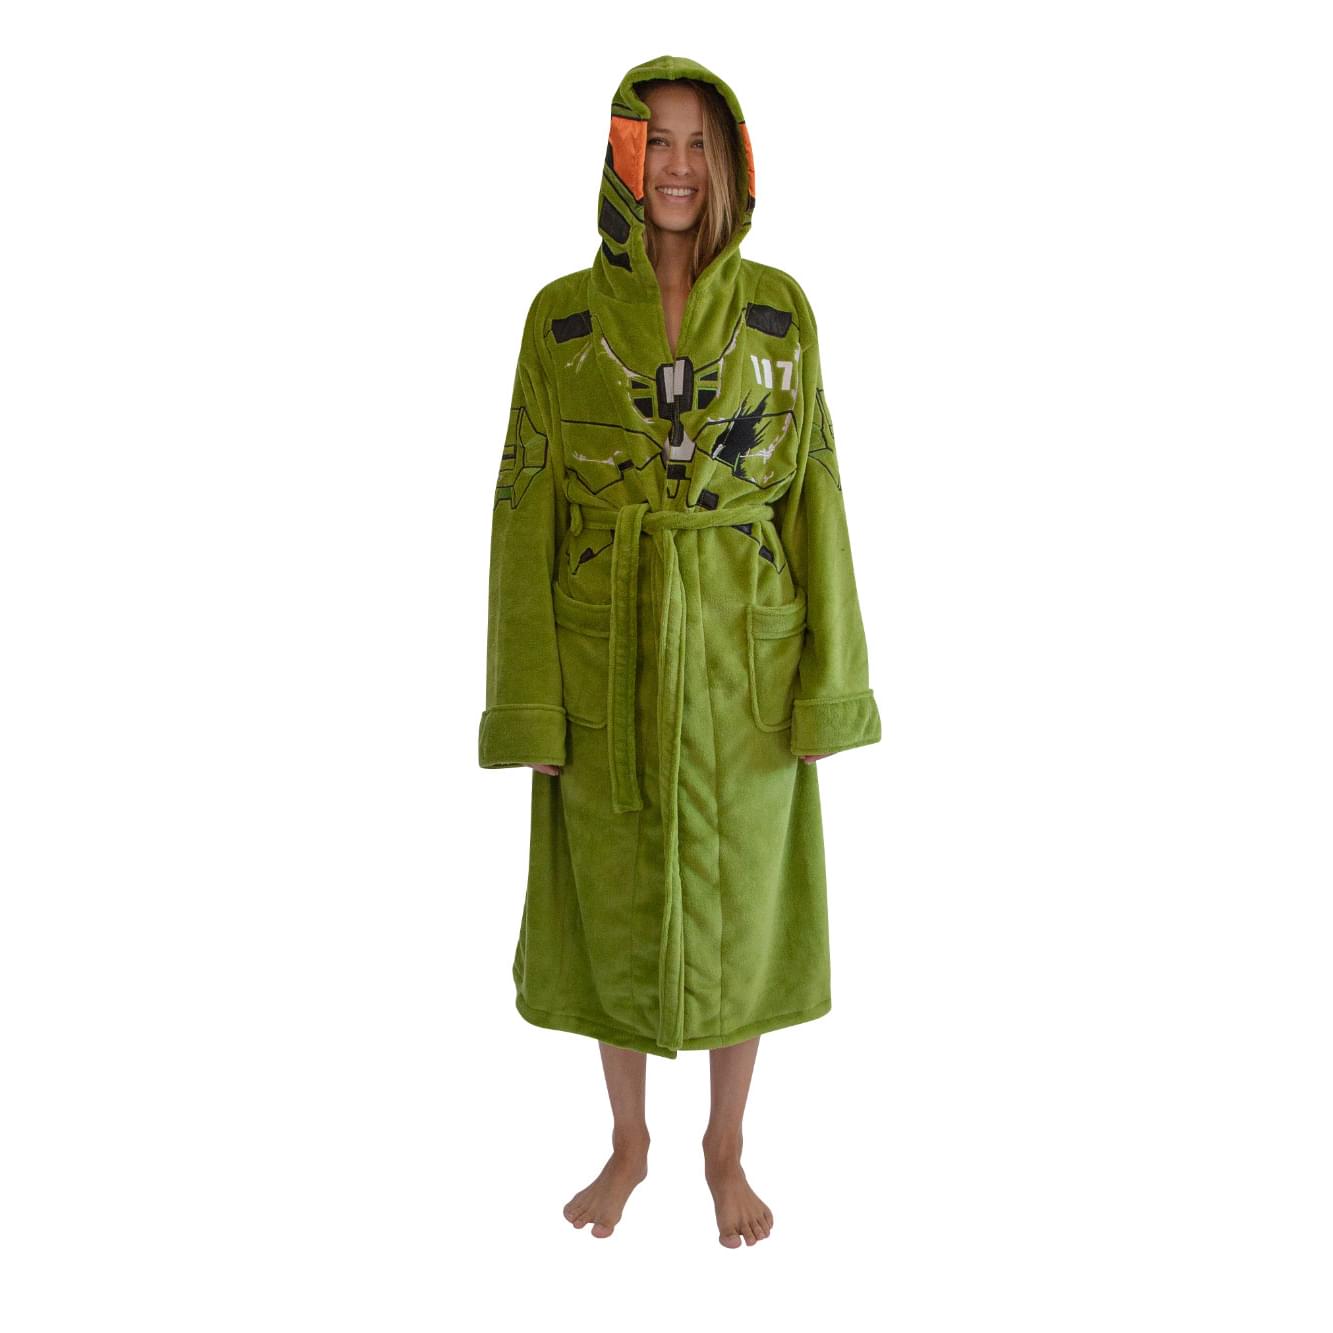 Halo Infinite Master Chief Hooded Bathrobe For Adults , One Size Fits Most